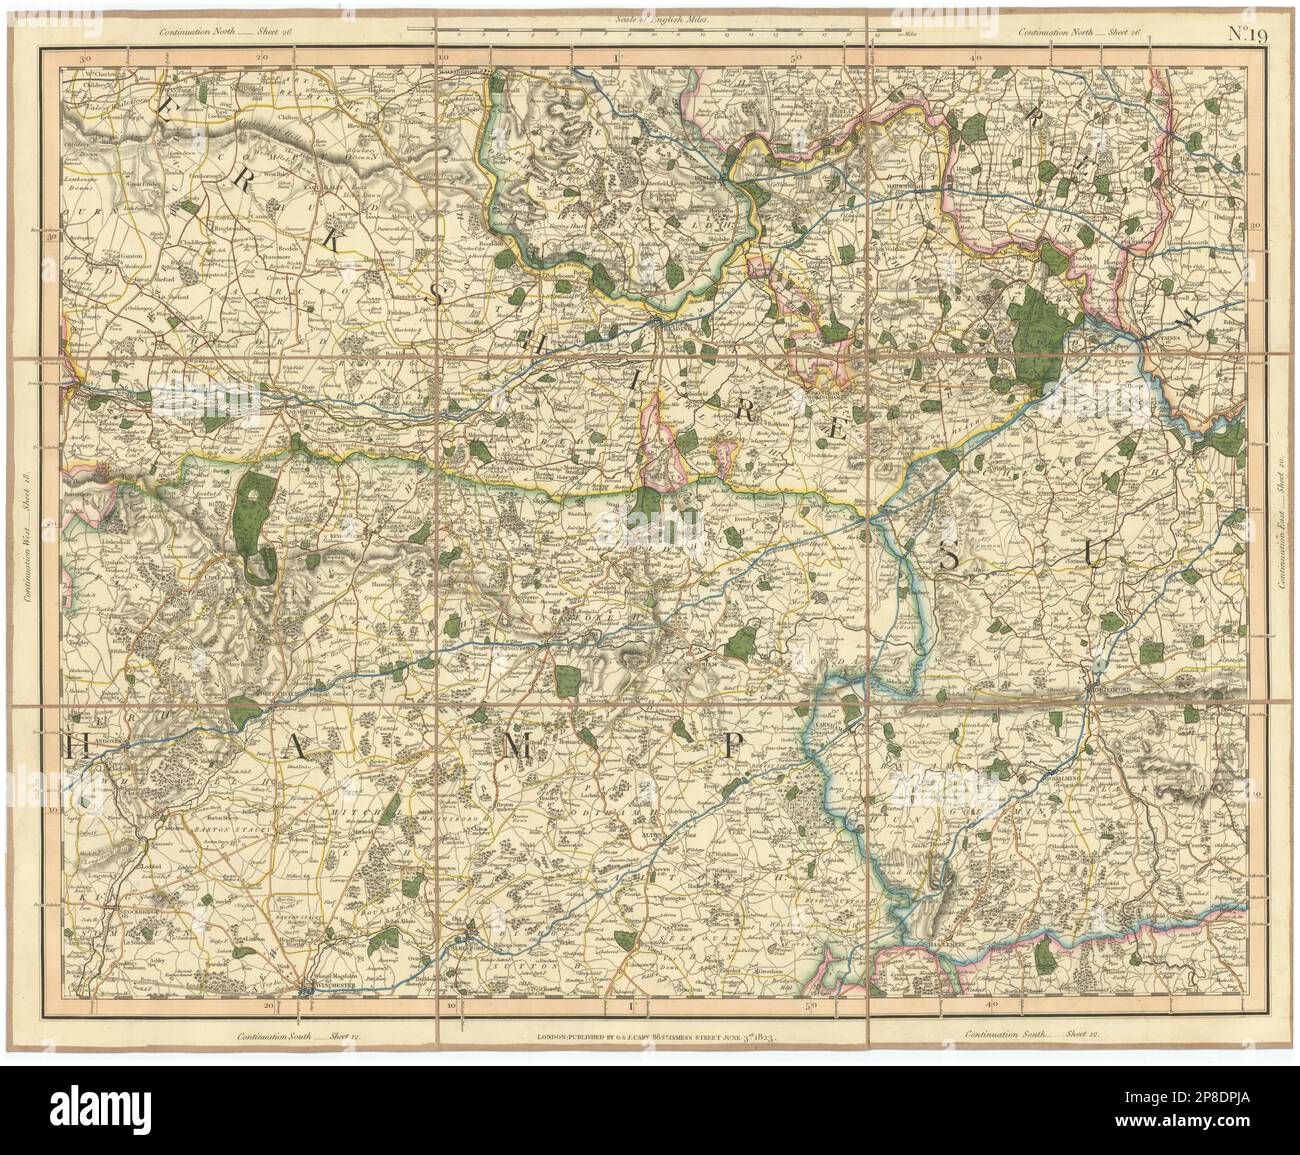 SURREY HILLS, THAMES VALLEY E WESSEX DOWNS. Berkshire, Hampshire. Mappa CARY 1832 Foto Stock